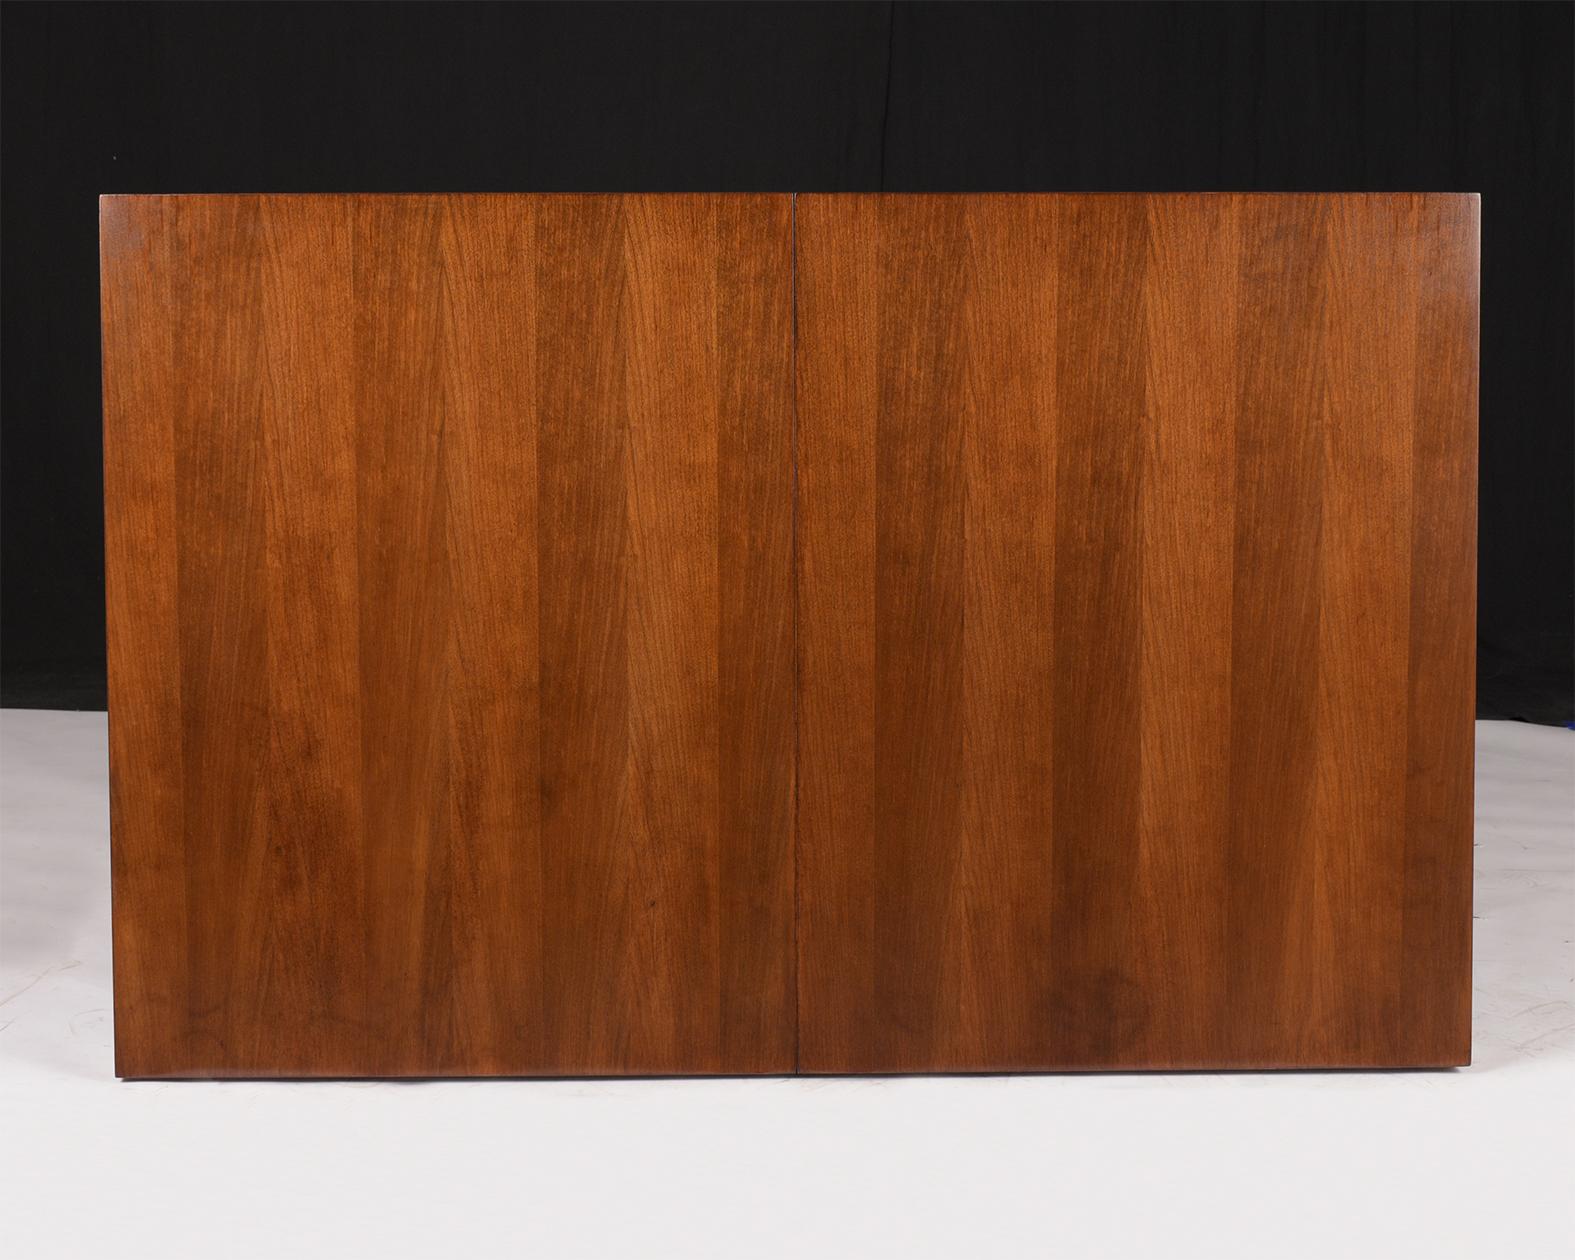 Carved Mid-Century Modern Lacquered Walnut Dining Table